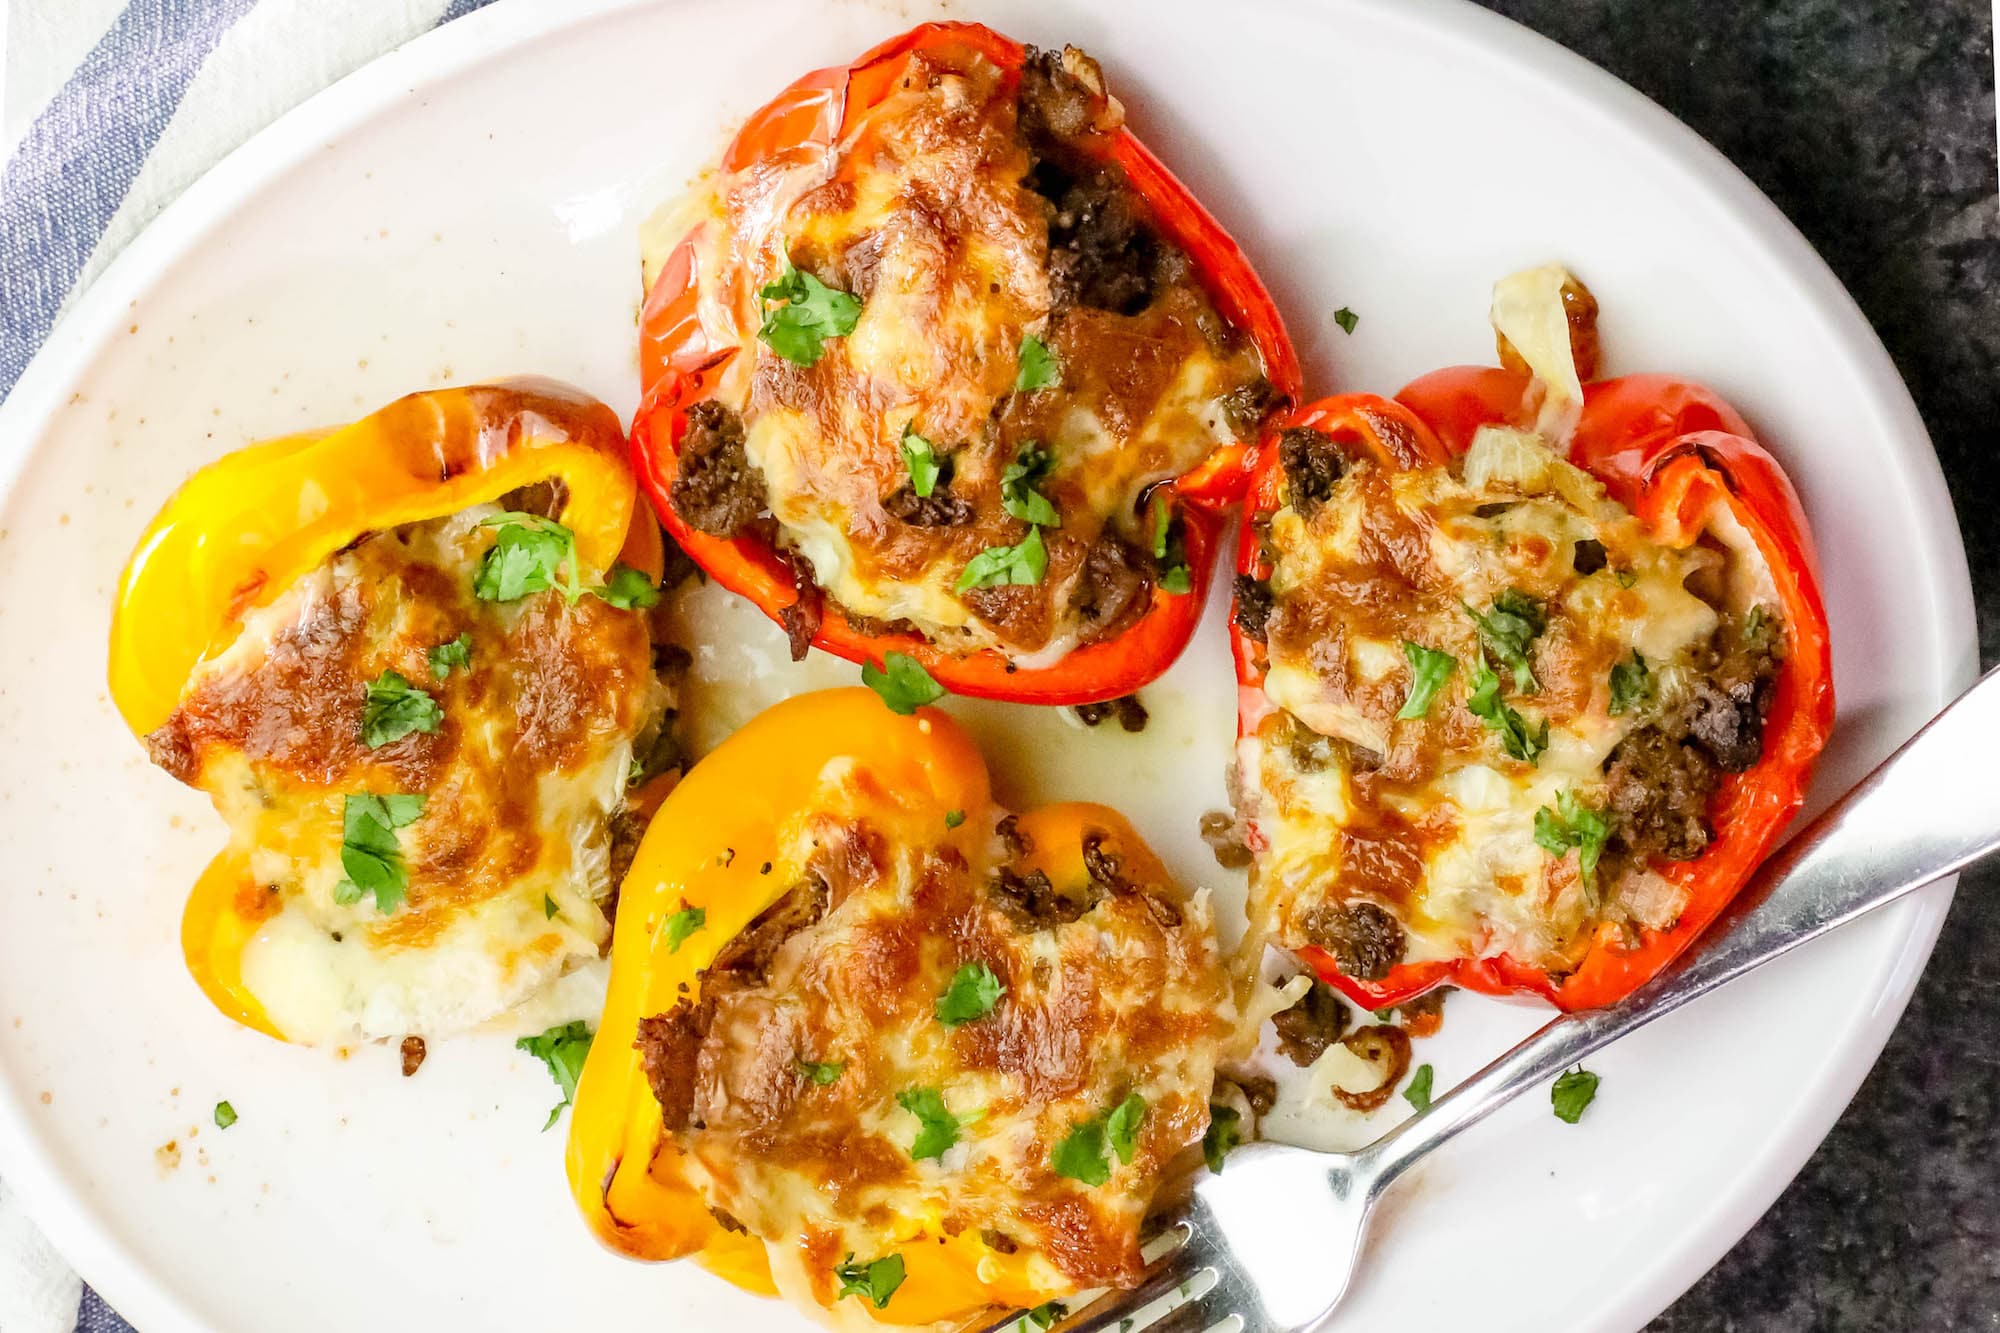 philly steak stuffed peppers